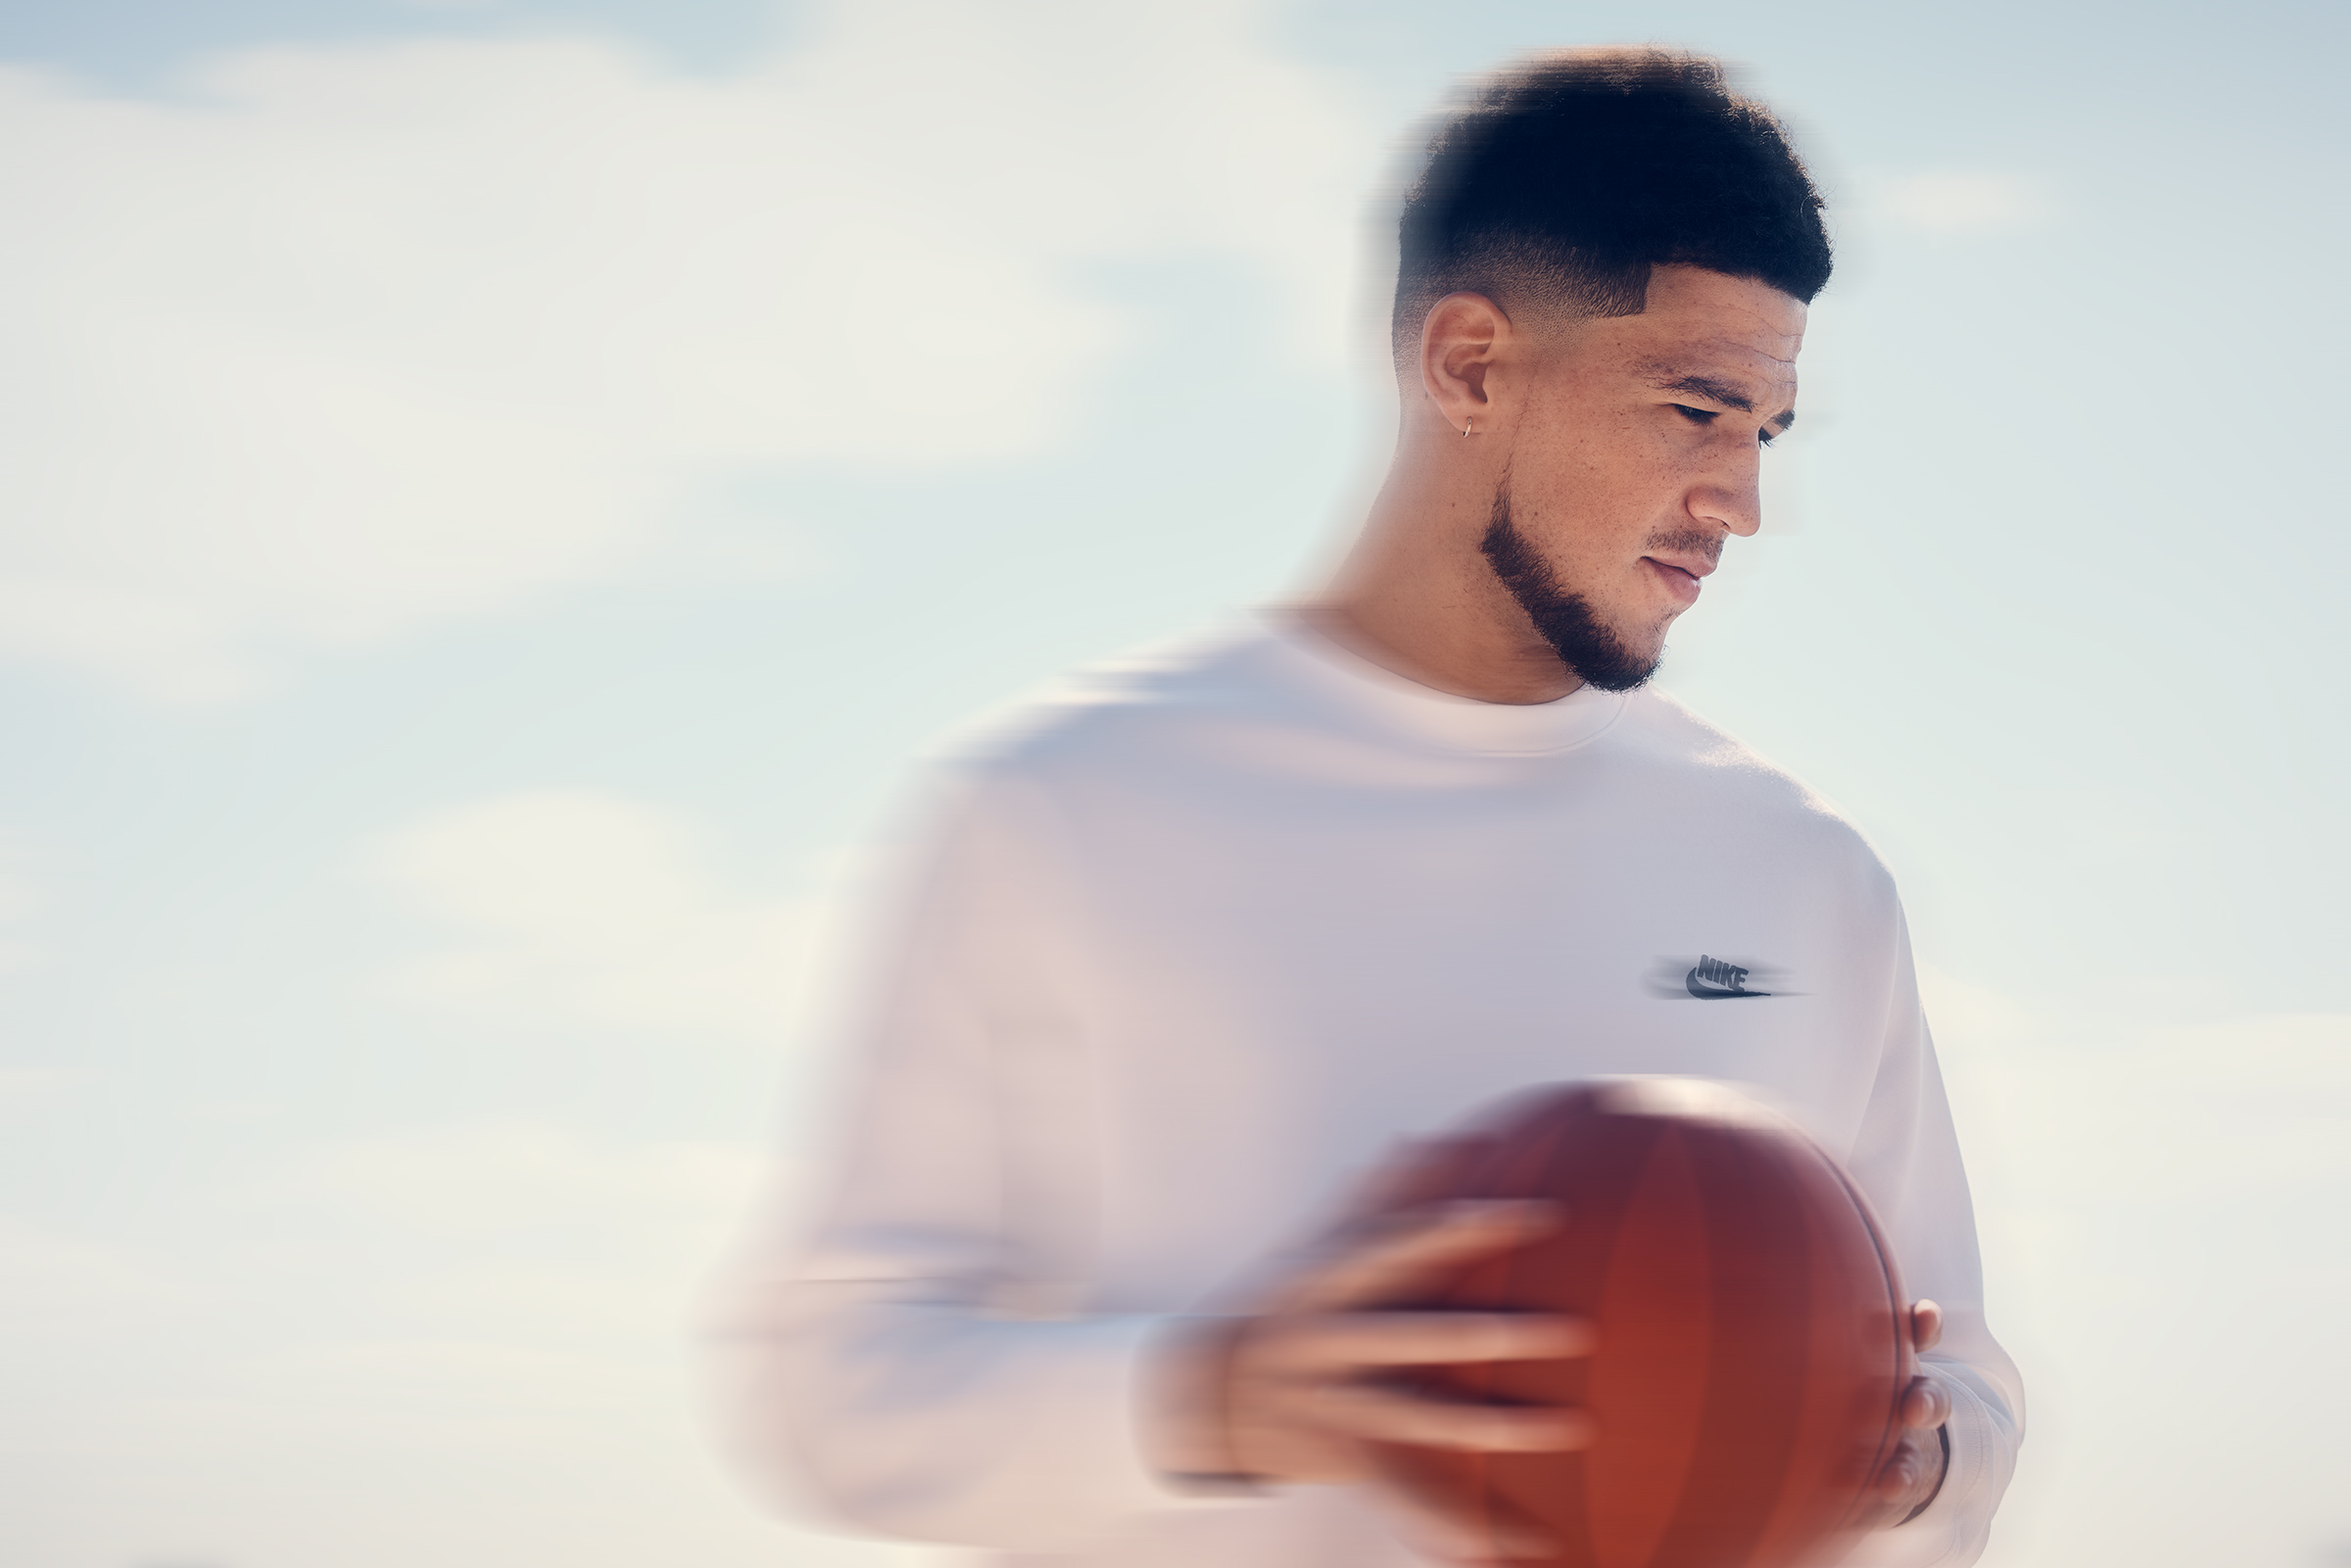 Ancell Digital Art OR. Los Angeles Sports THE FUTURE IS...  Devin Booker Blur